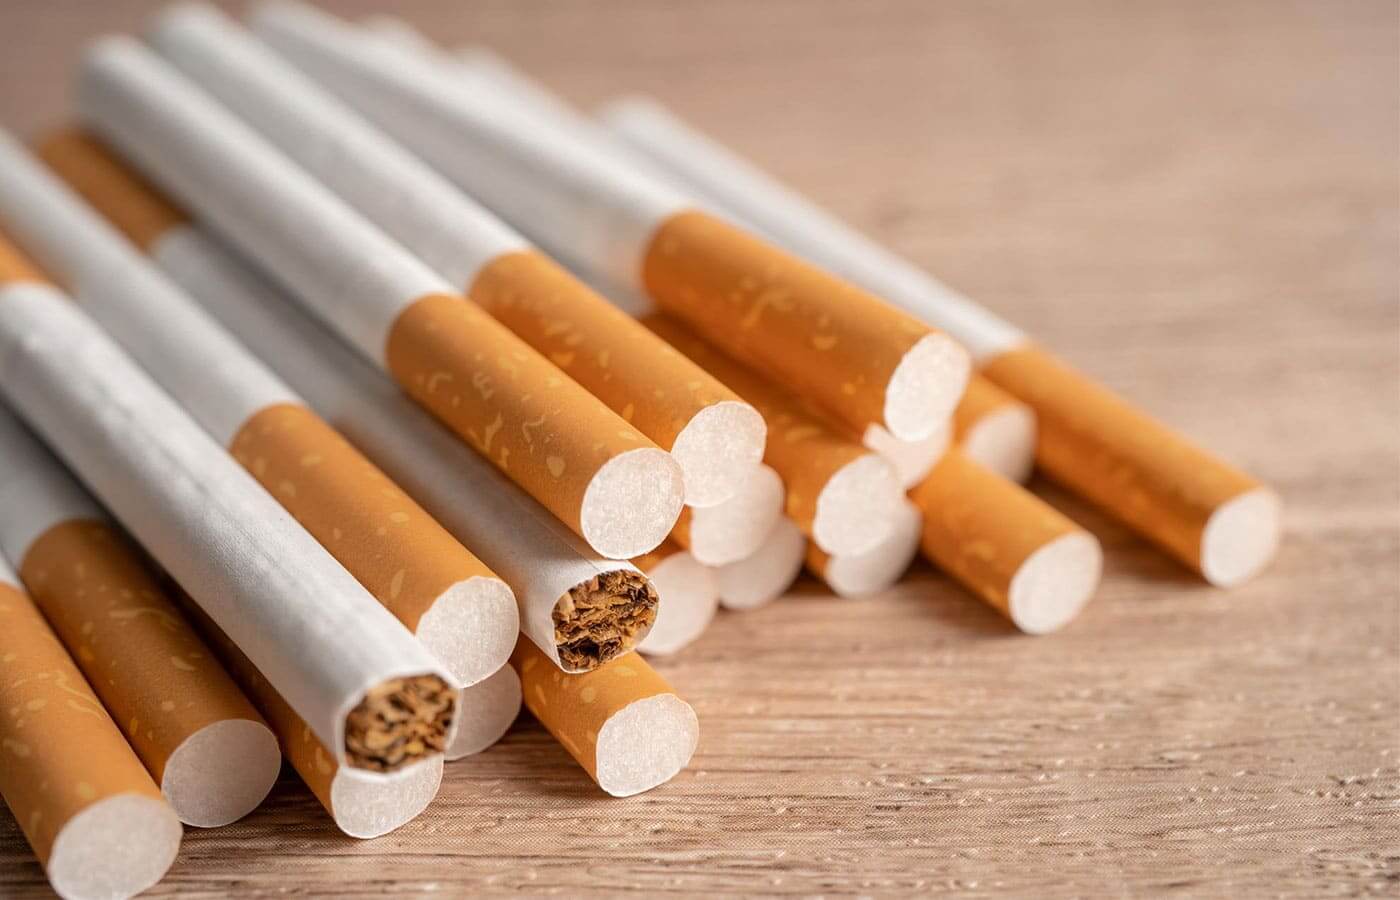 A small pile of cigarettes on a table